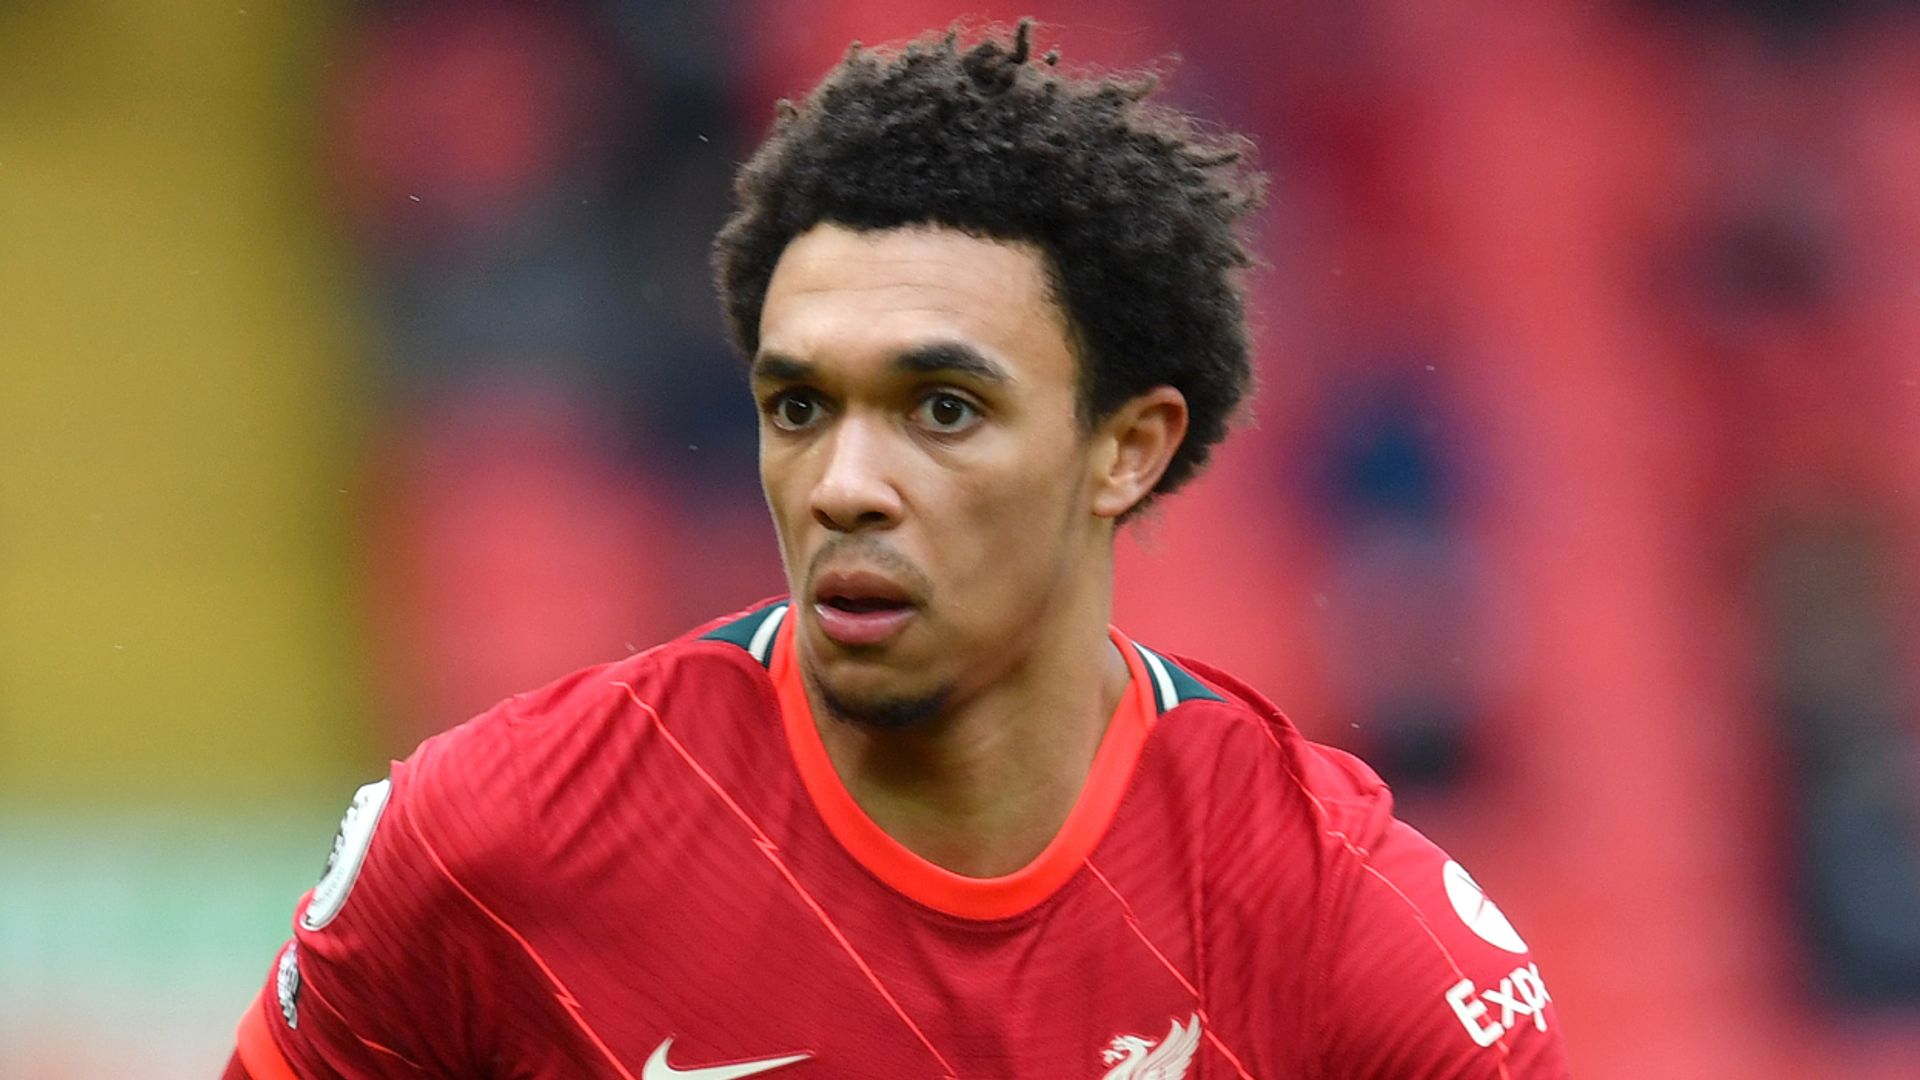 Alexander-Arnold: I'm fit, healthy and ready to play